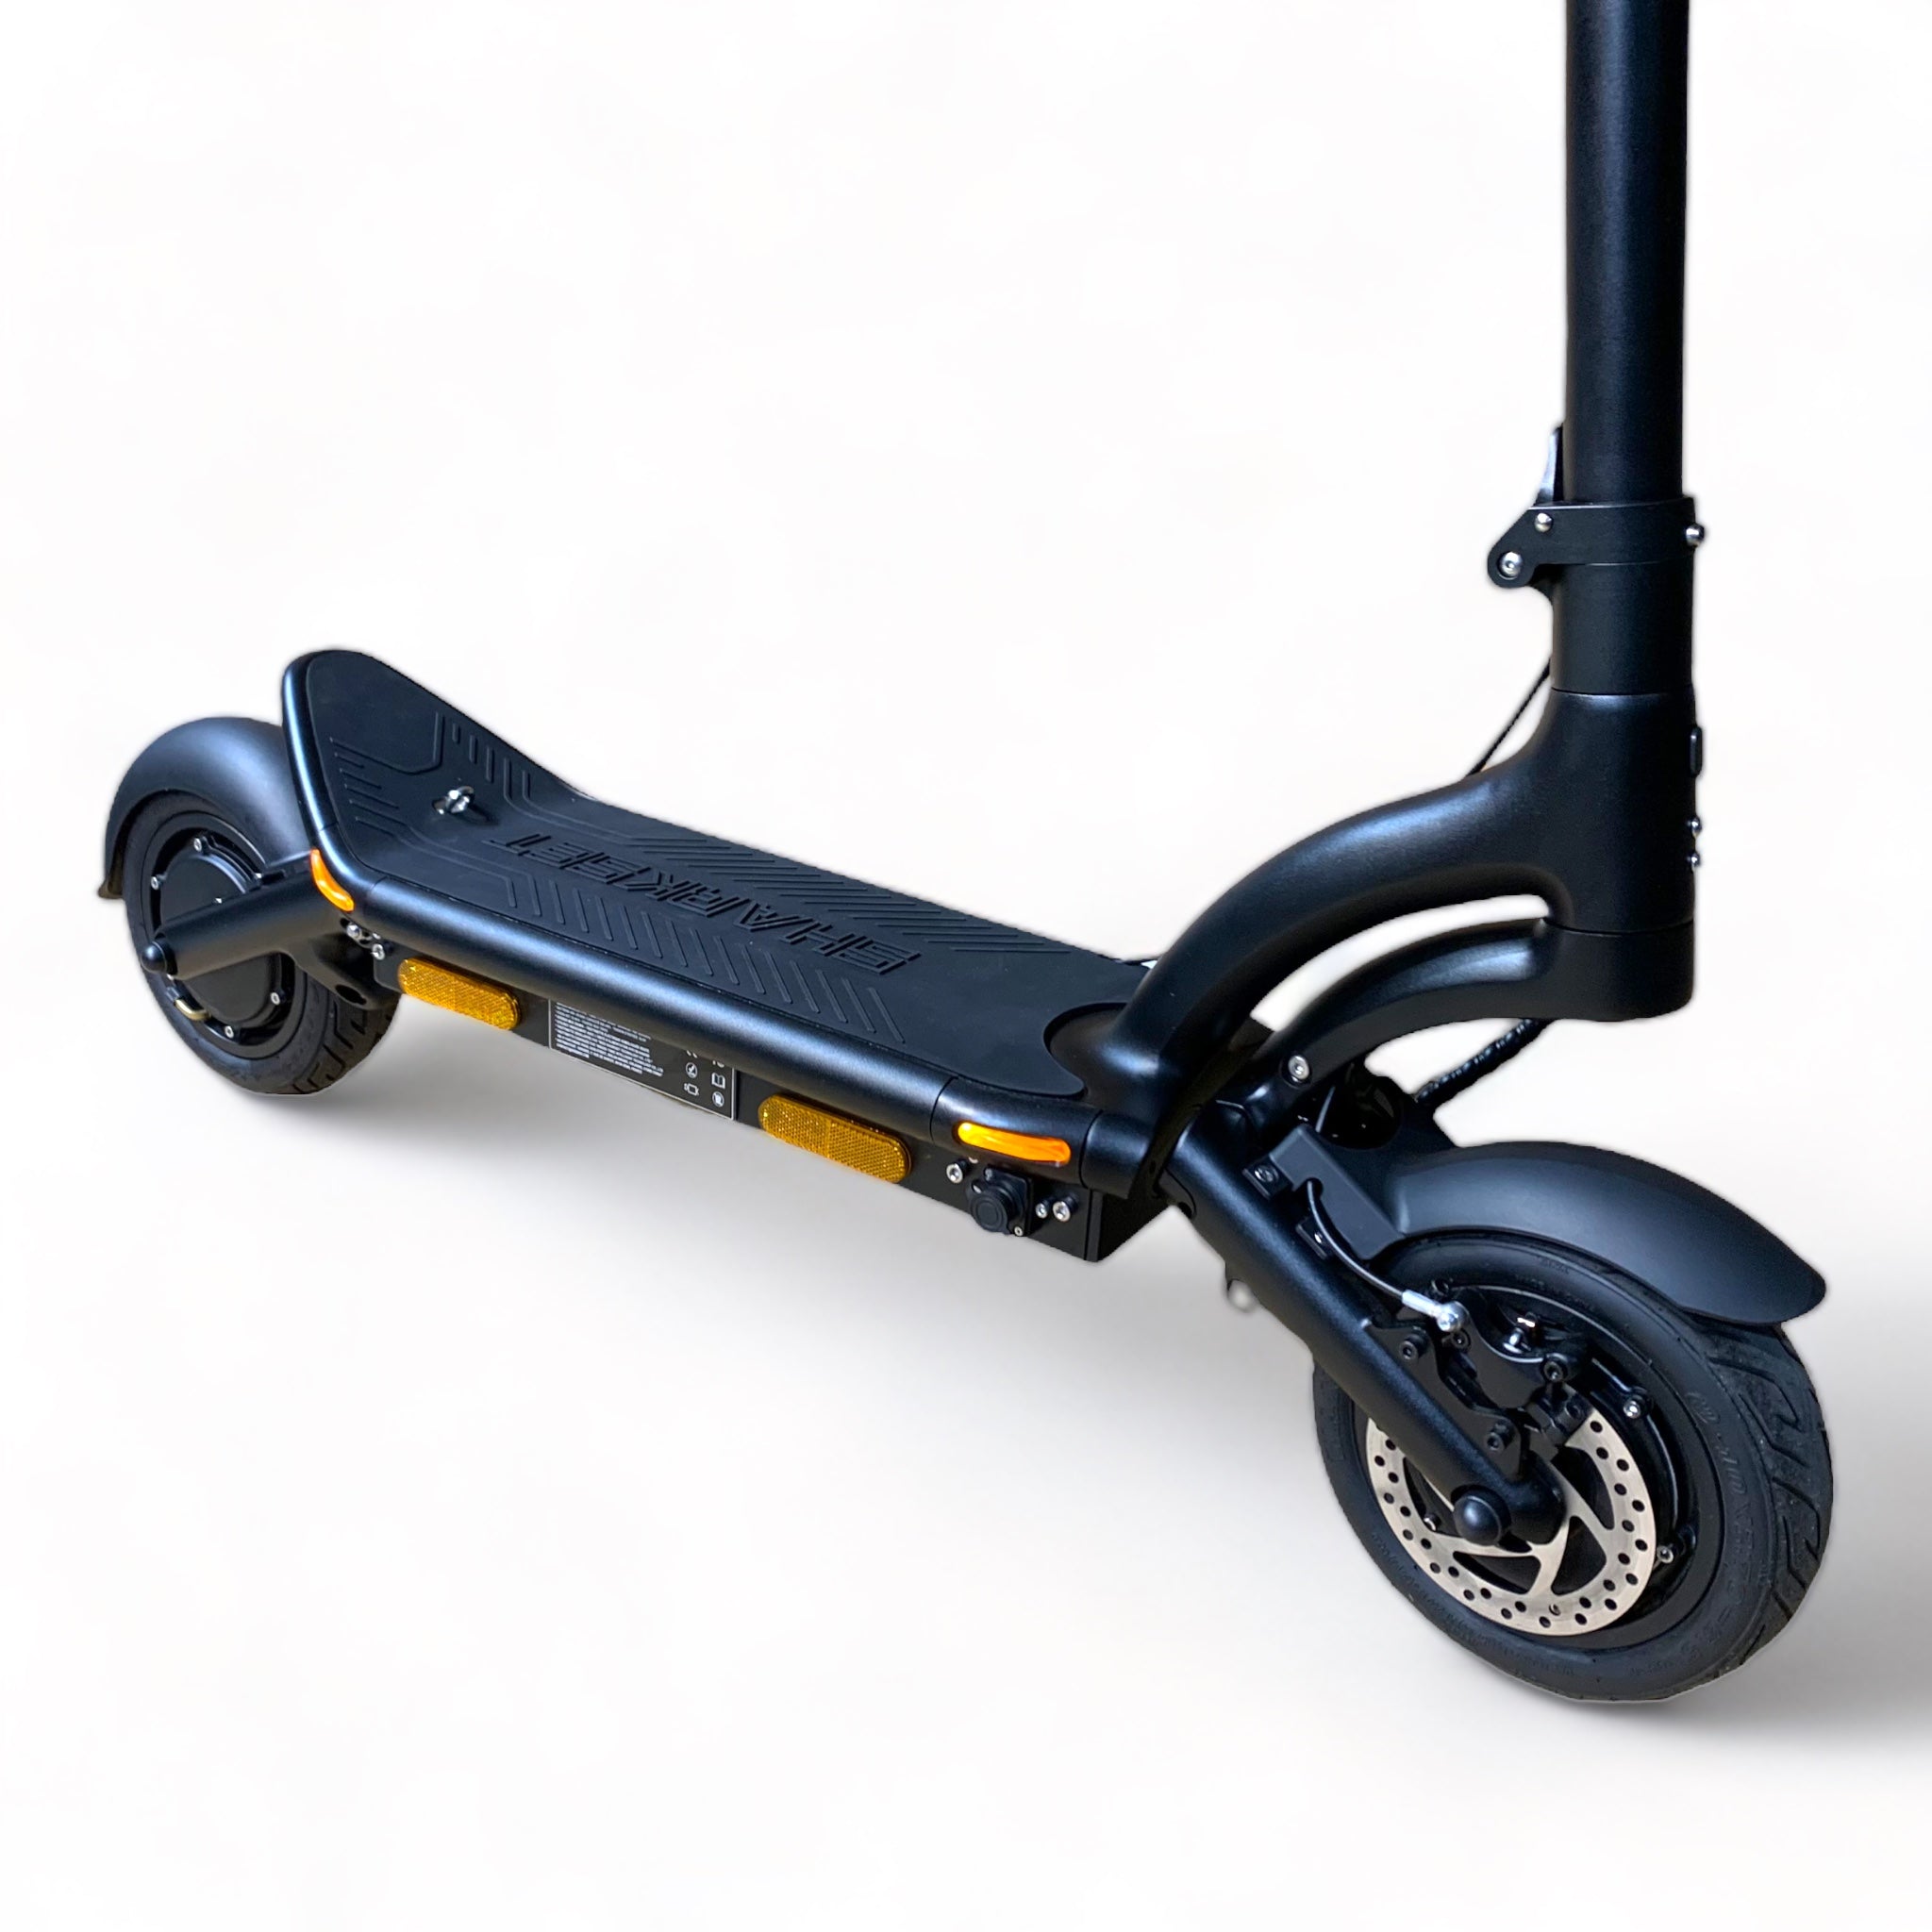 SHARKSET RS1 electric scooter